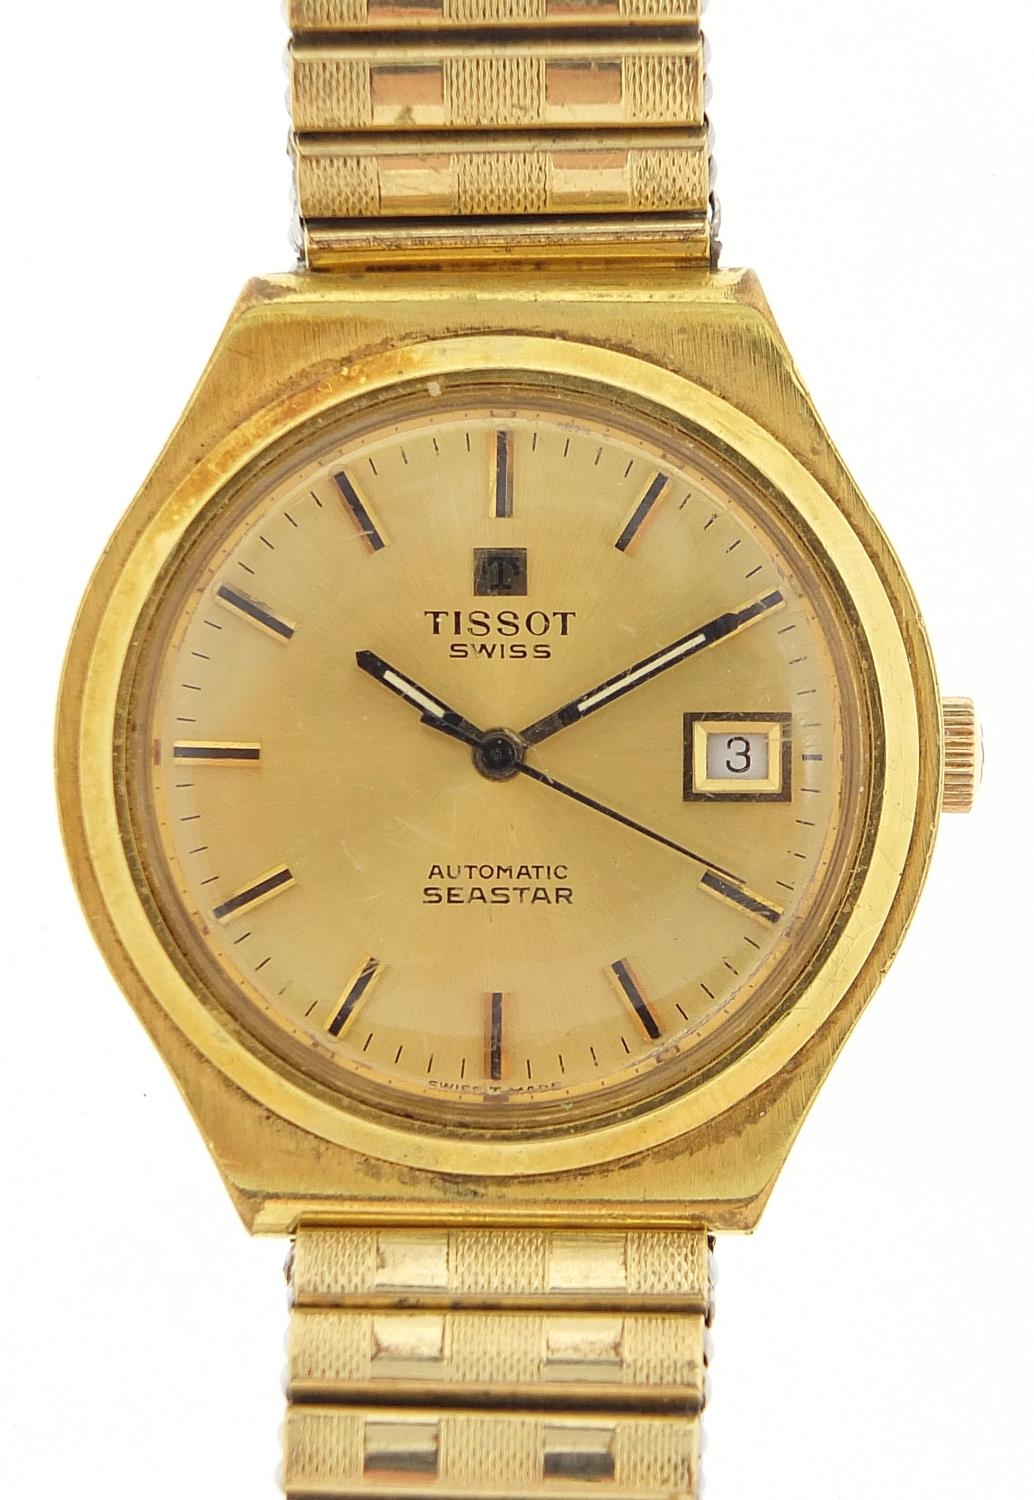 Tissot, vintage gentlemen's Tissot Seastar automatic wristwatch with date aperture with box, the